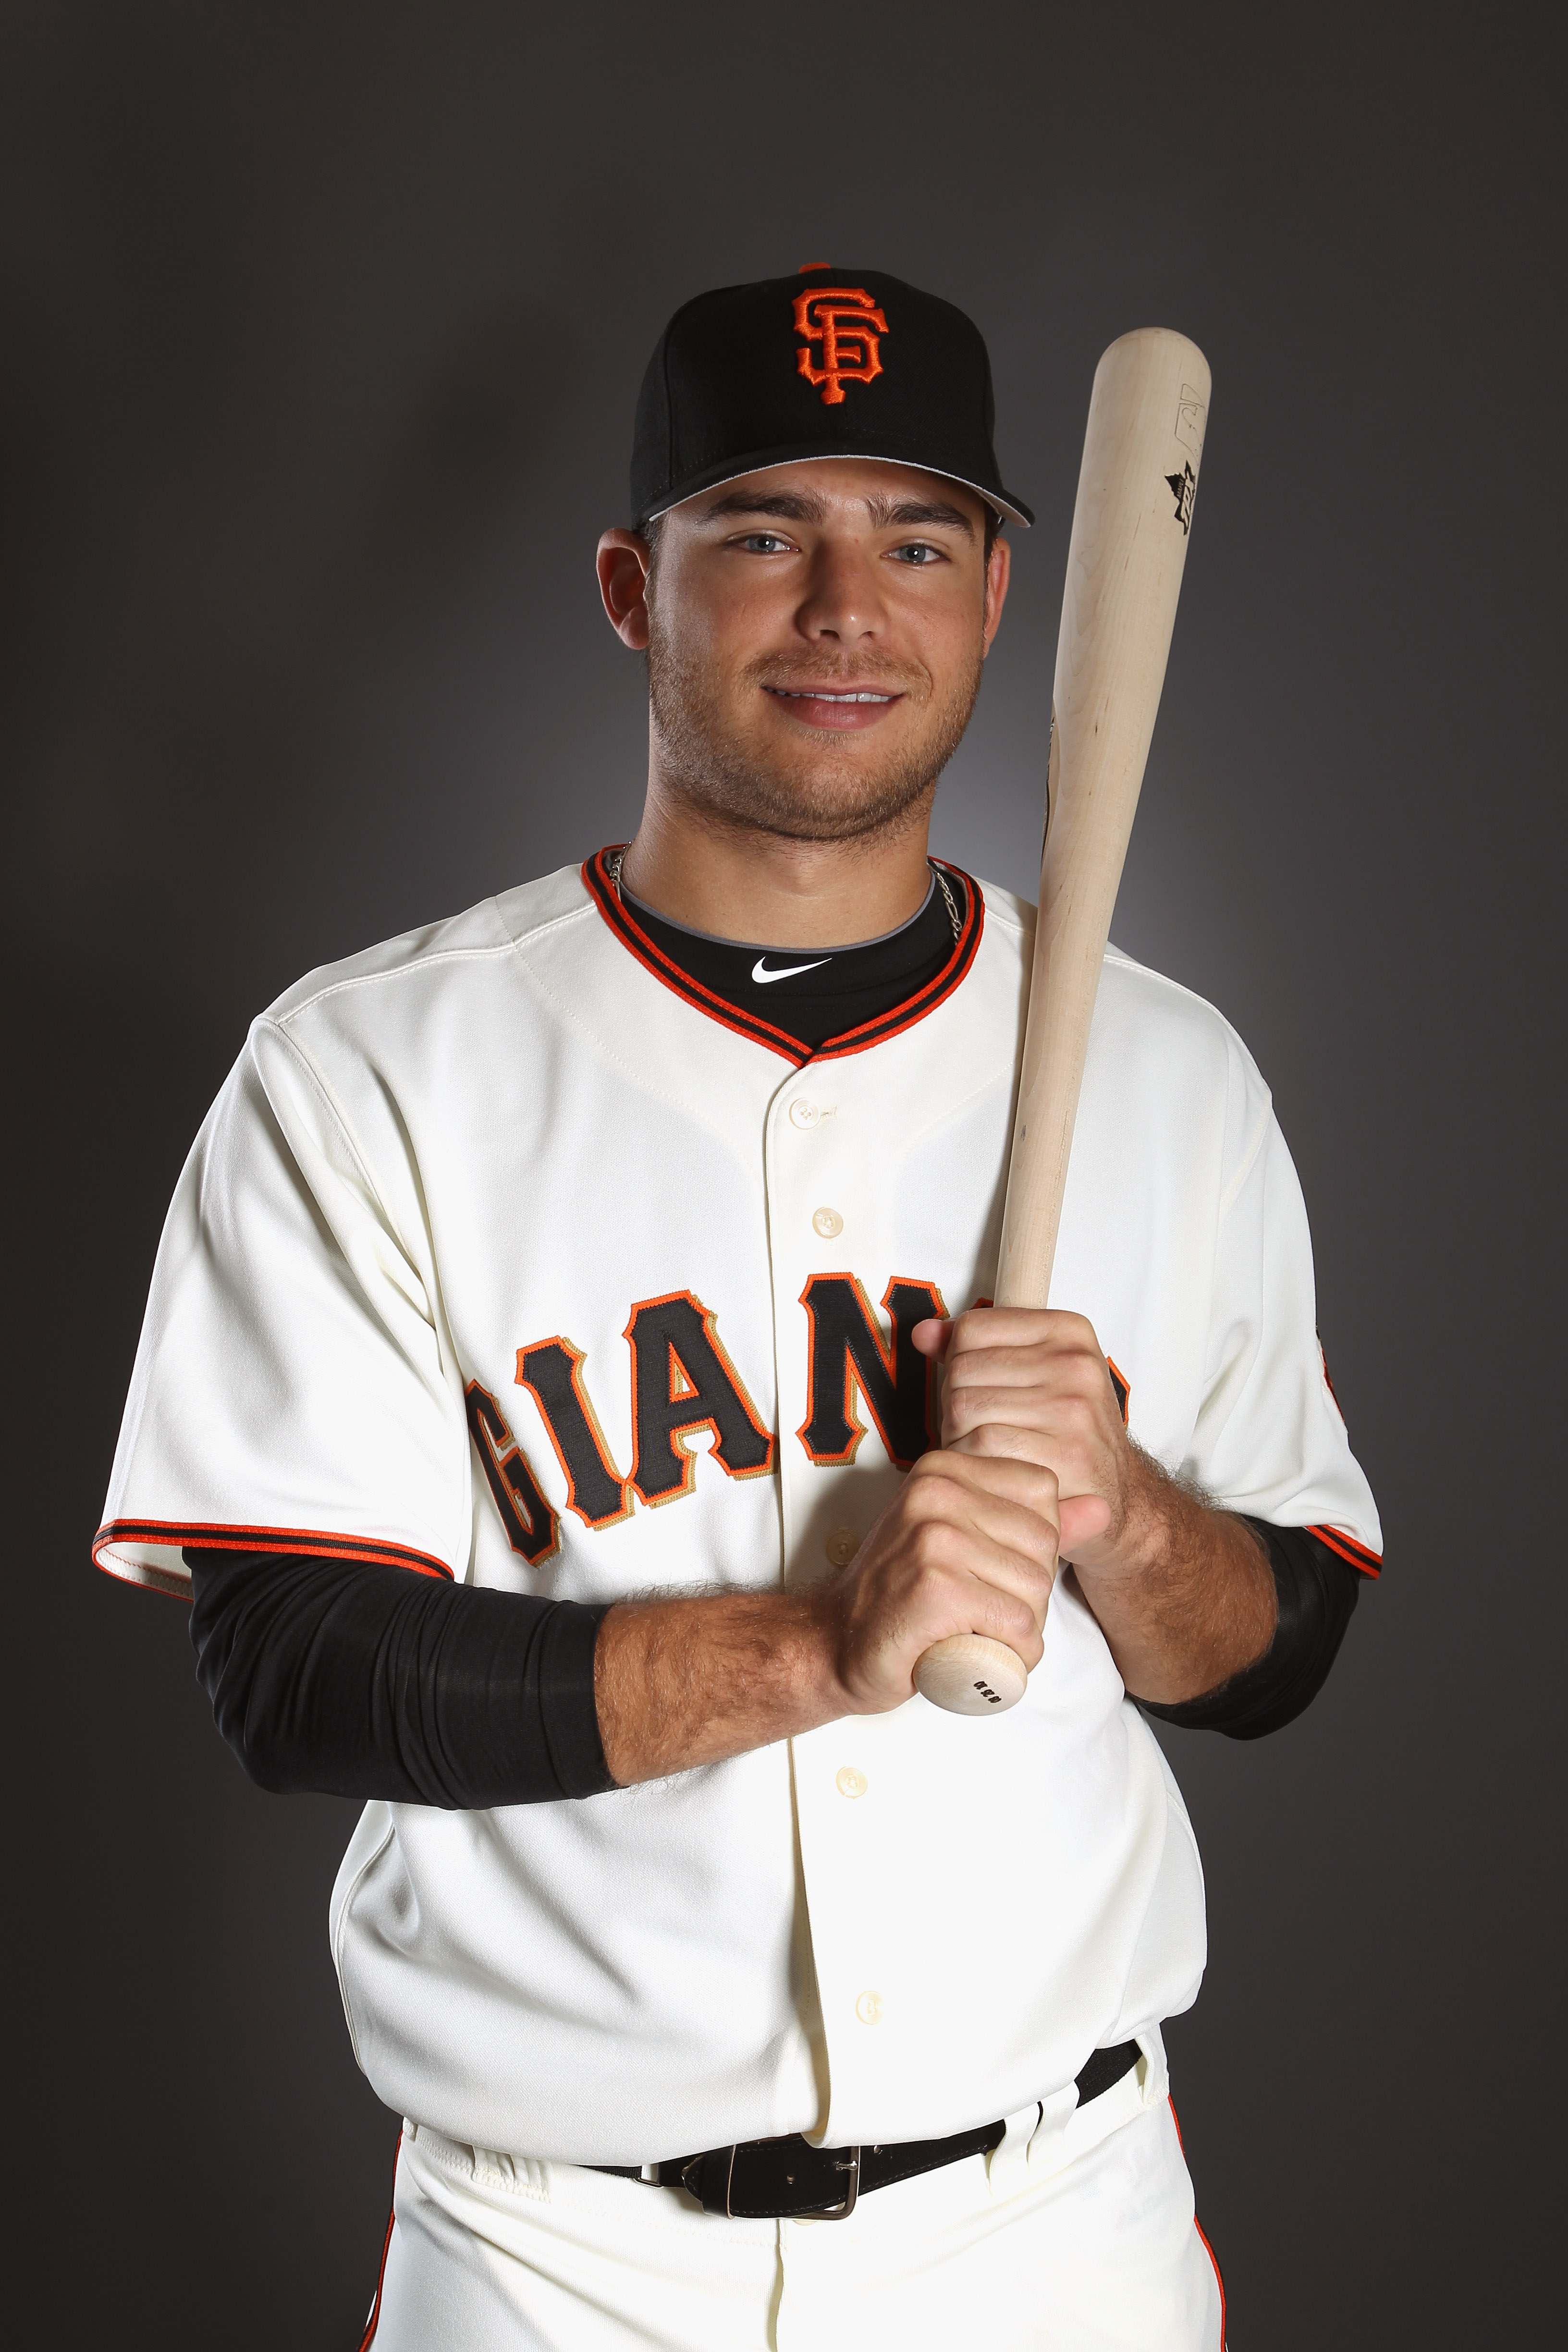 San Francisco Giants: Brandon Crawford's Role in 2011